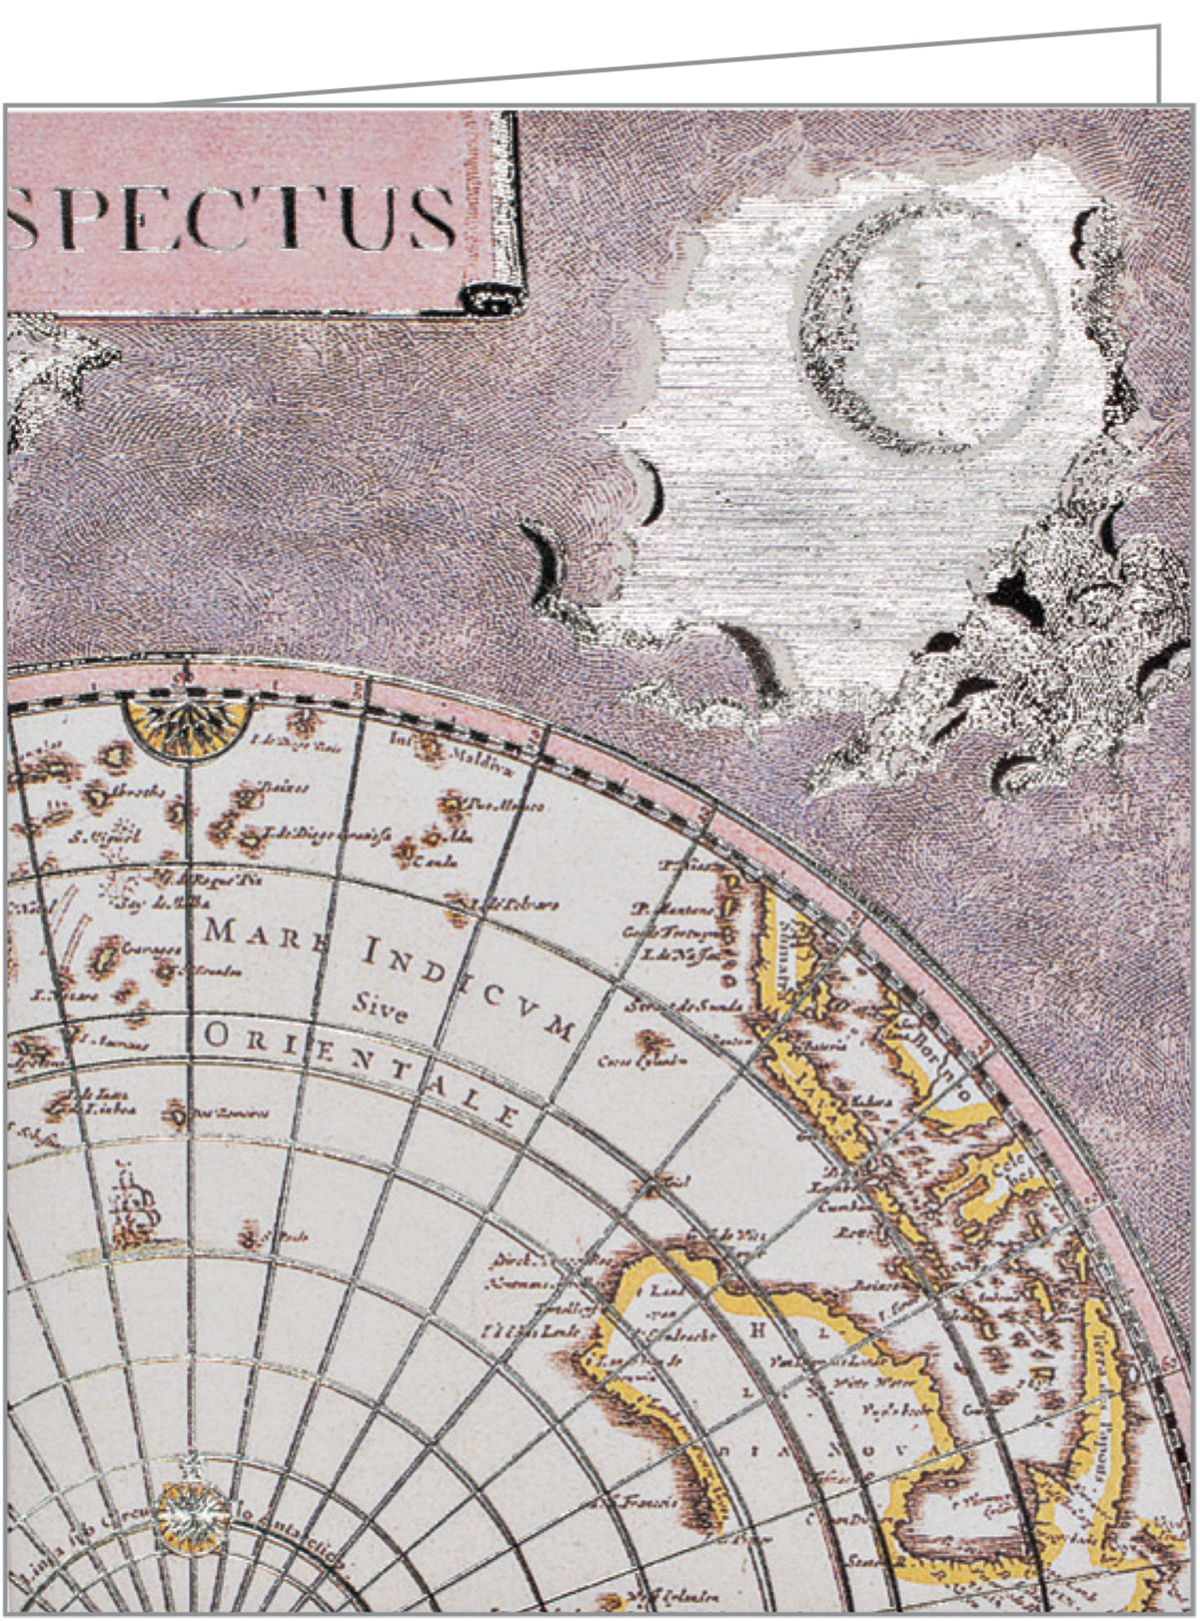 Vintage style colour illustration of quarter portion of world globe with golden yellow sun with face to top left corner